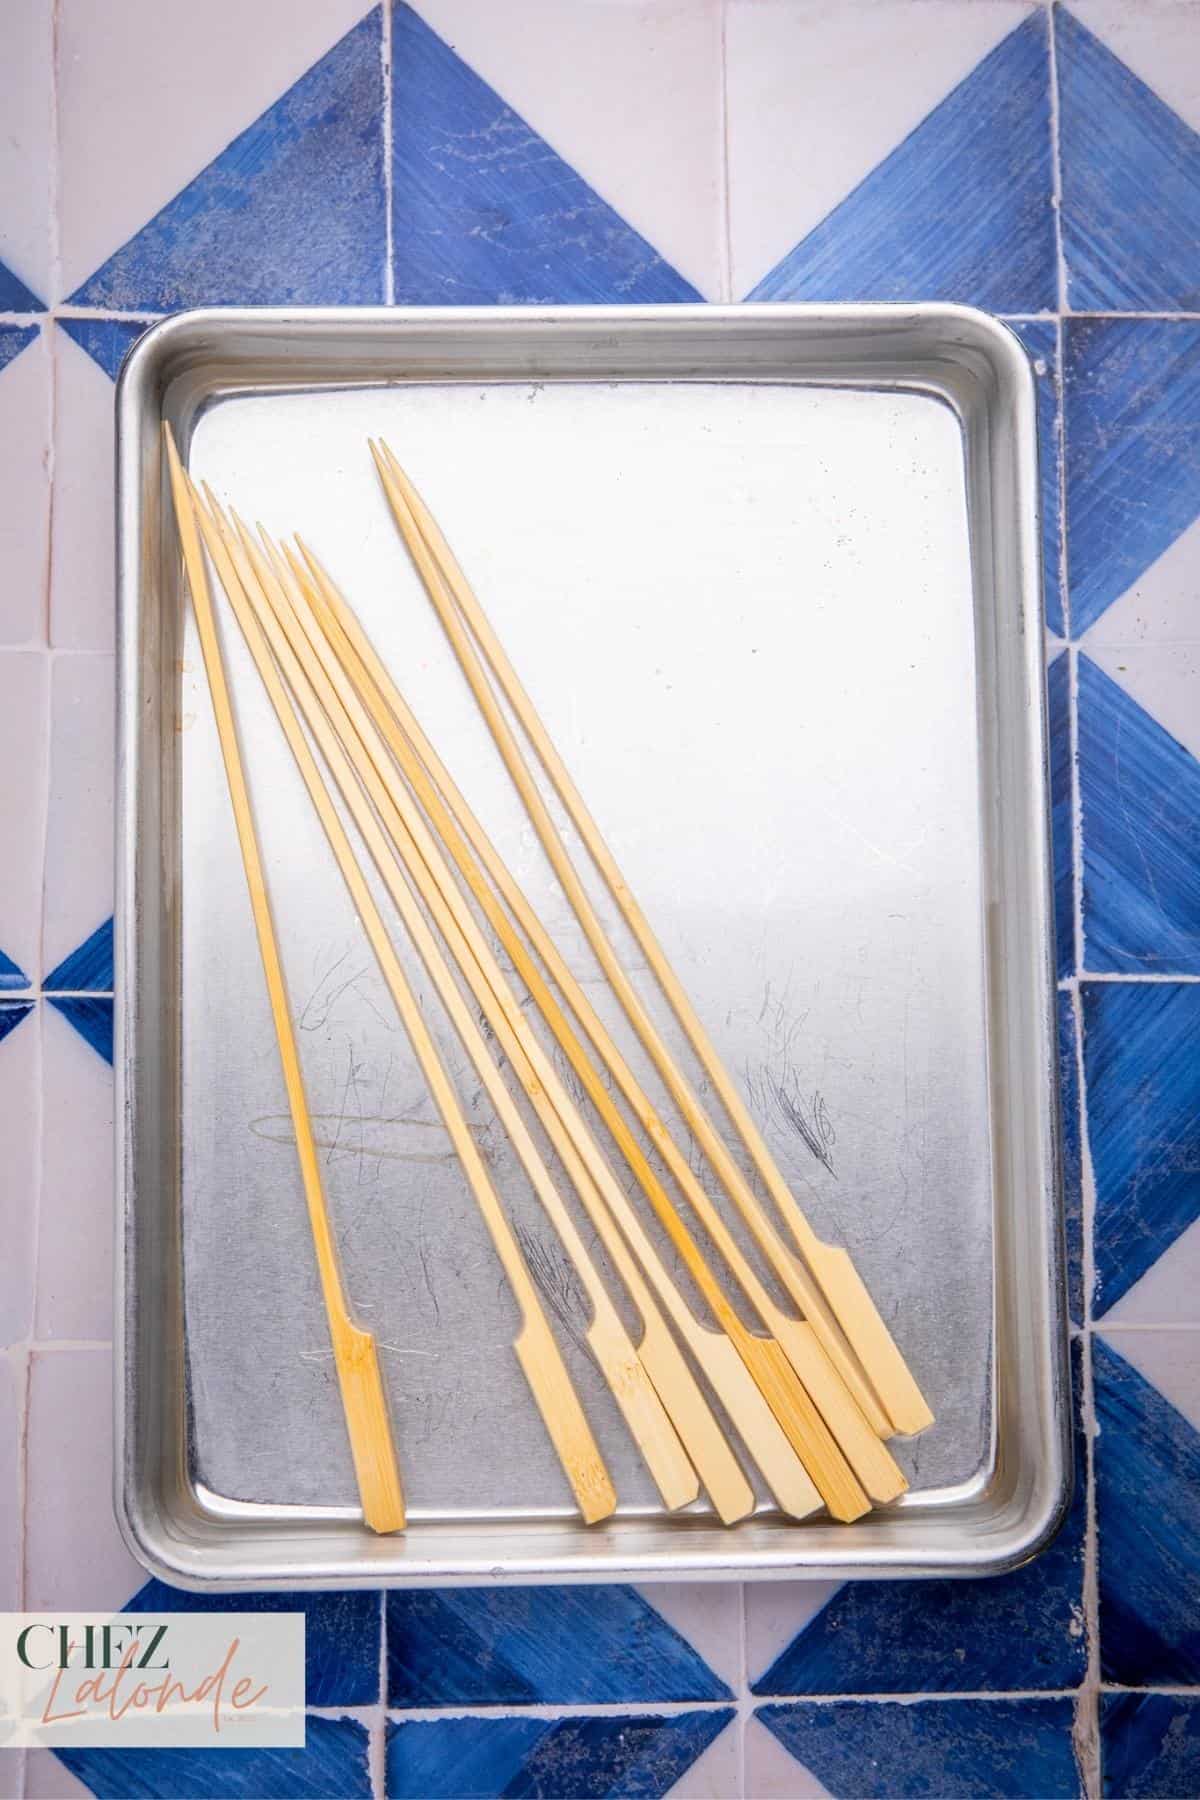 soak your wooden skewers in water for 30 minutes. This preps them for use in the air fryer and prevents unwanted charring.